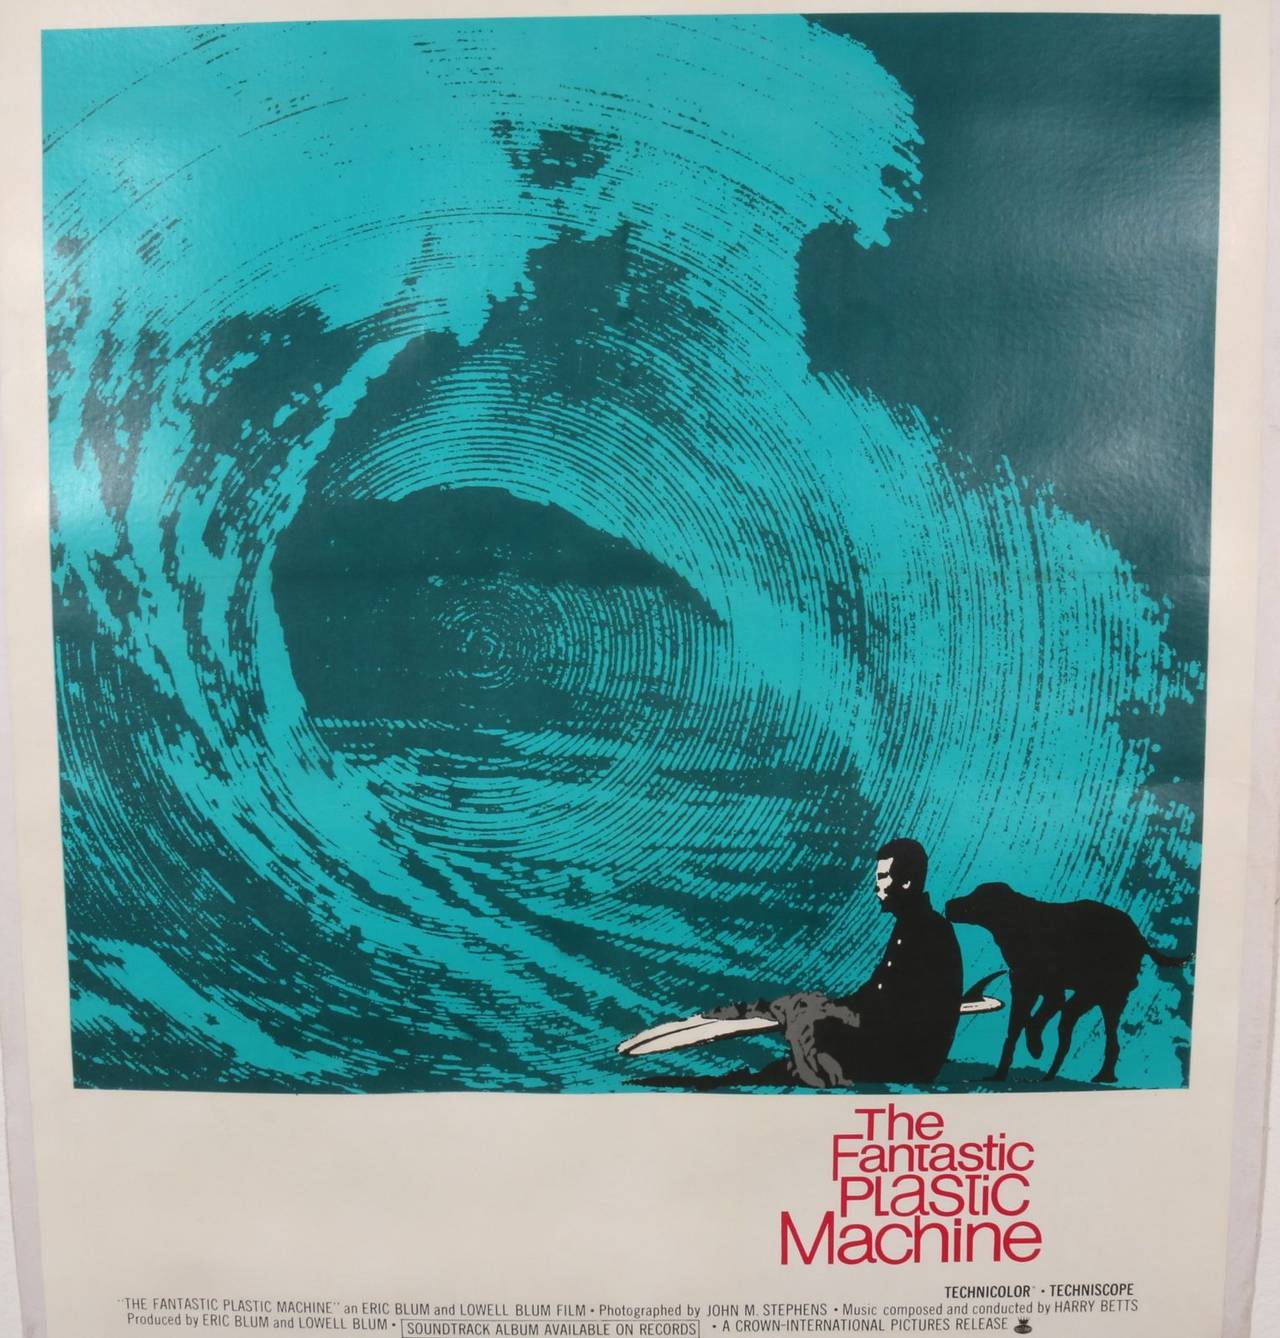 This crisp, clean and energetic graphic merges spy movie drama with surf movie vibe. Swirls of blue accented by black and white graphics reflective of the popular James Bond, Lee Marvin, Point Blank movie genre era. 

In this case the poster